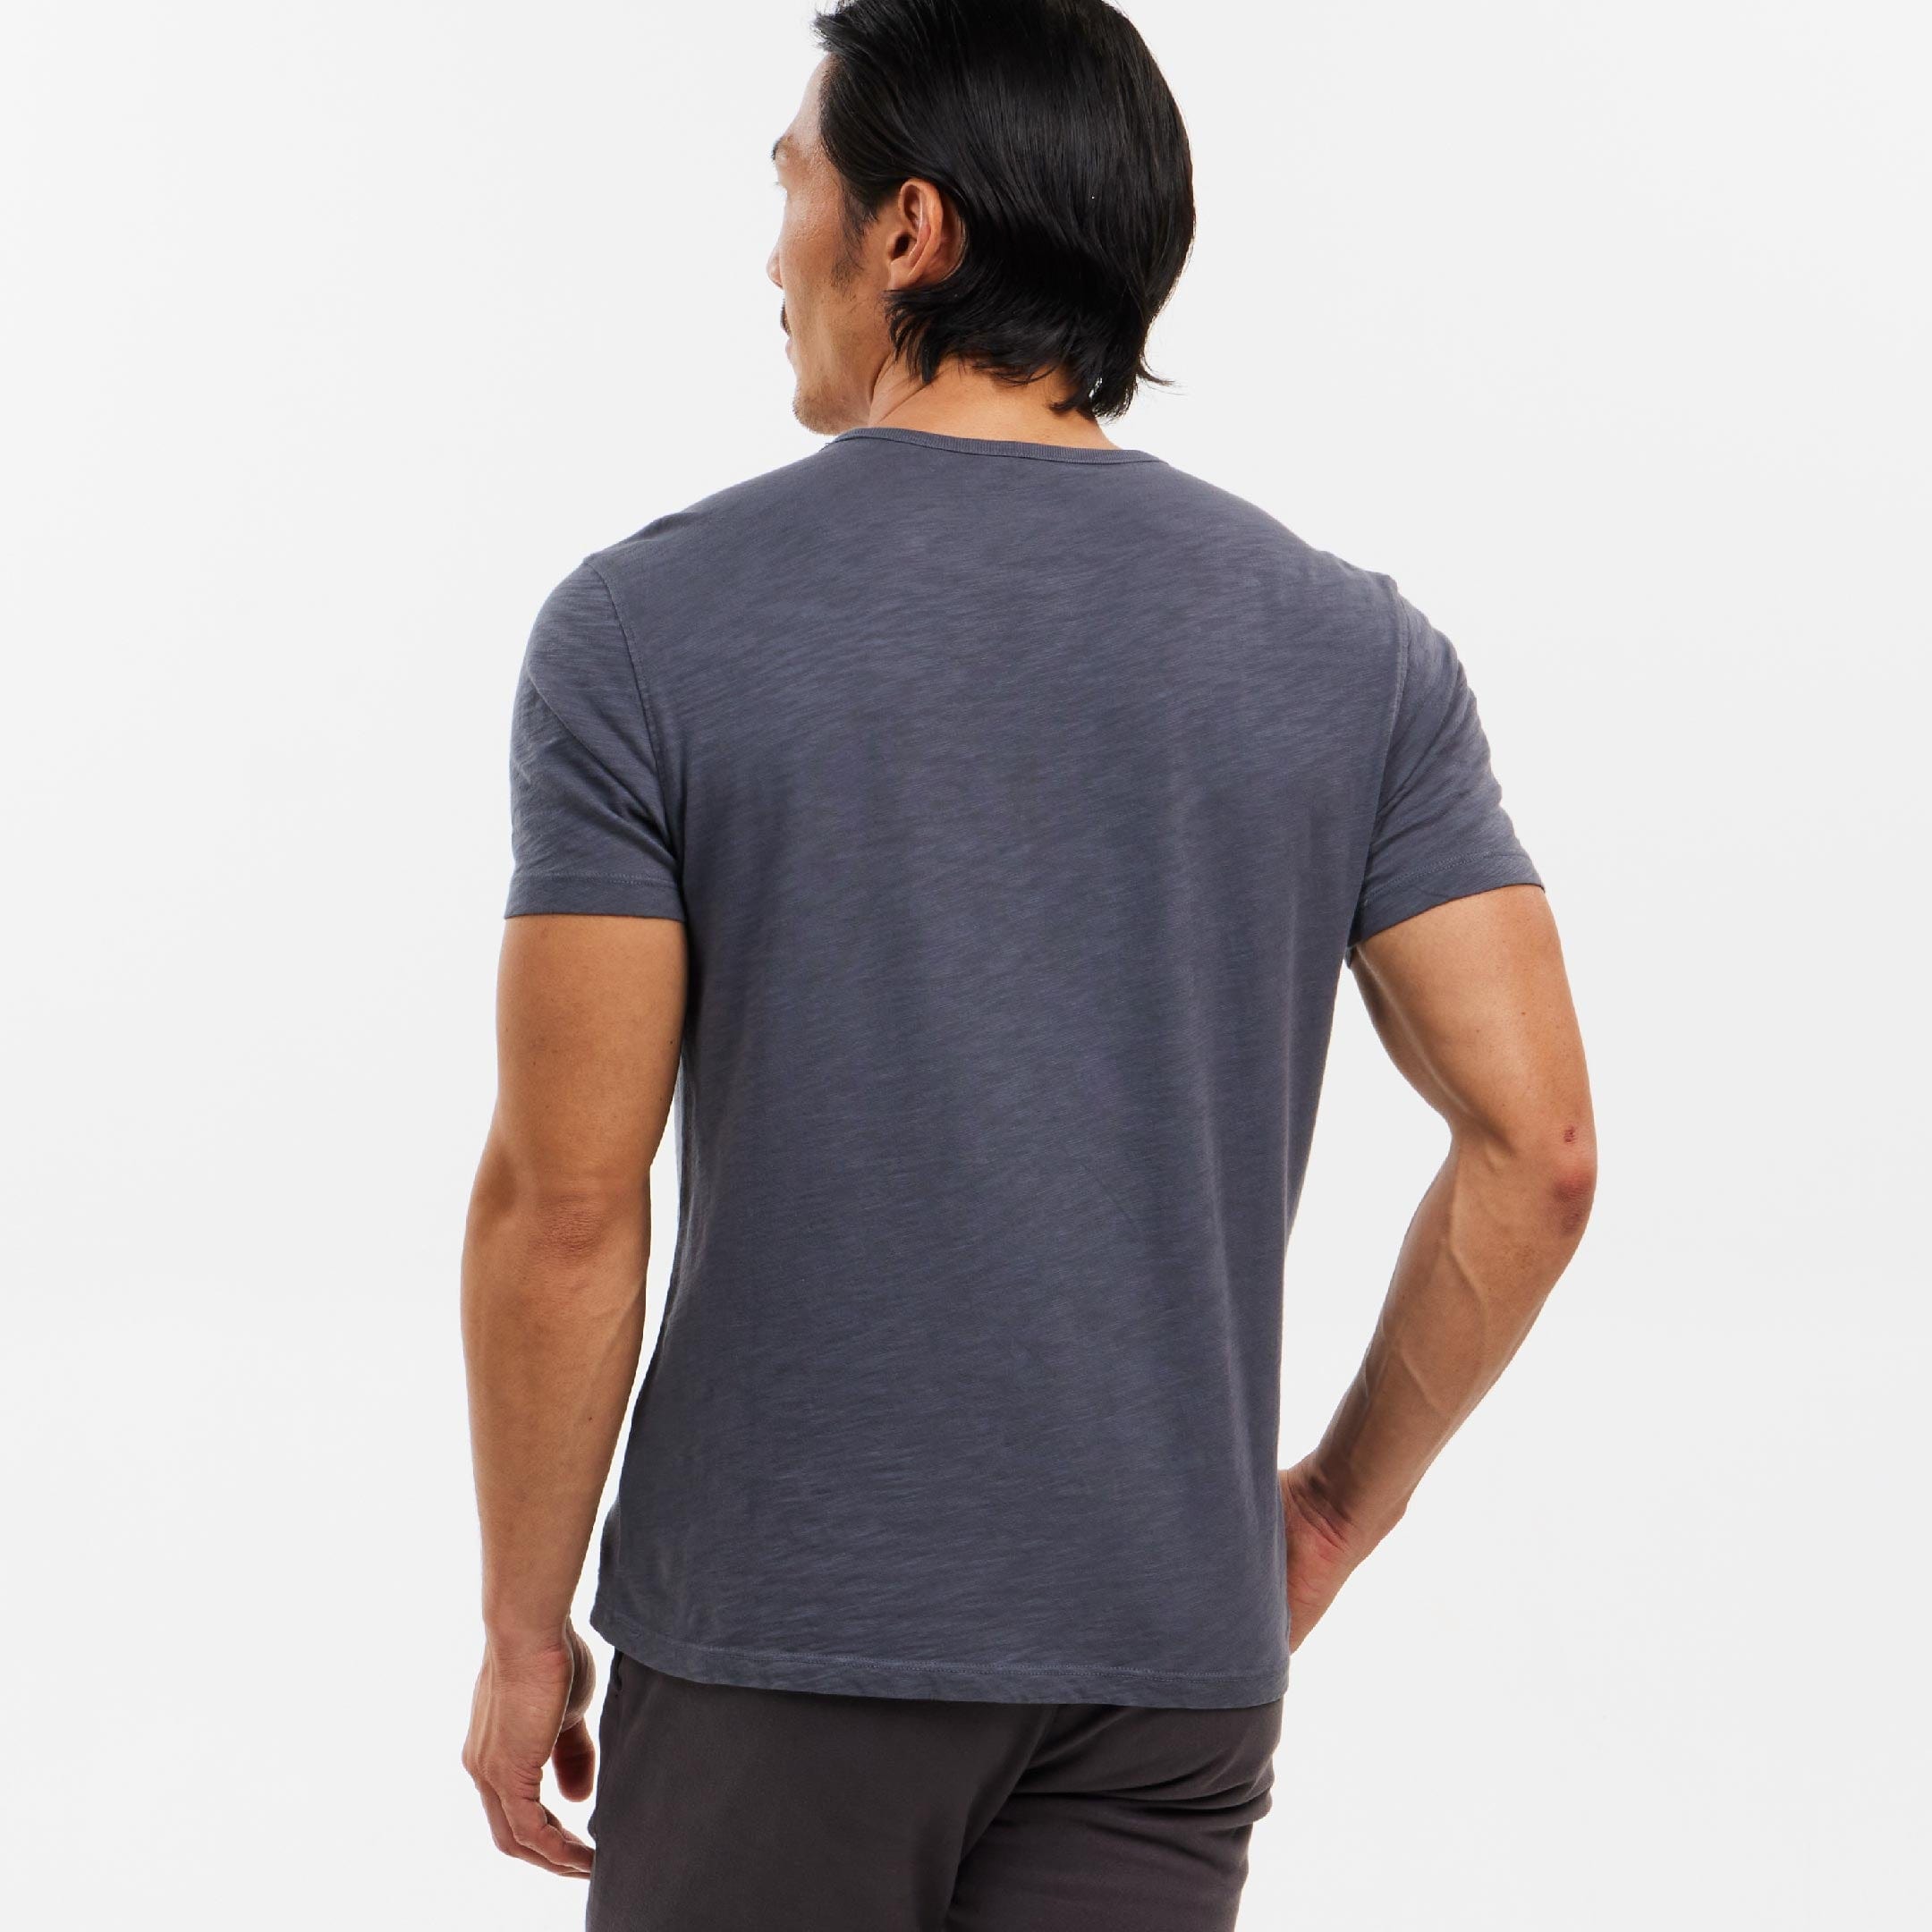 T-Shirts for Short Men: Proper Length, Top Brands and More